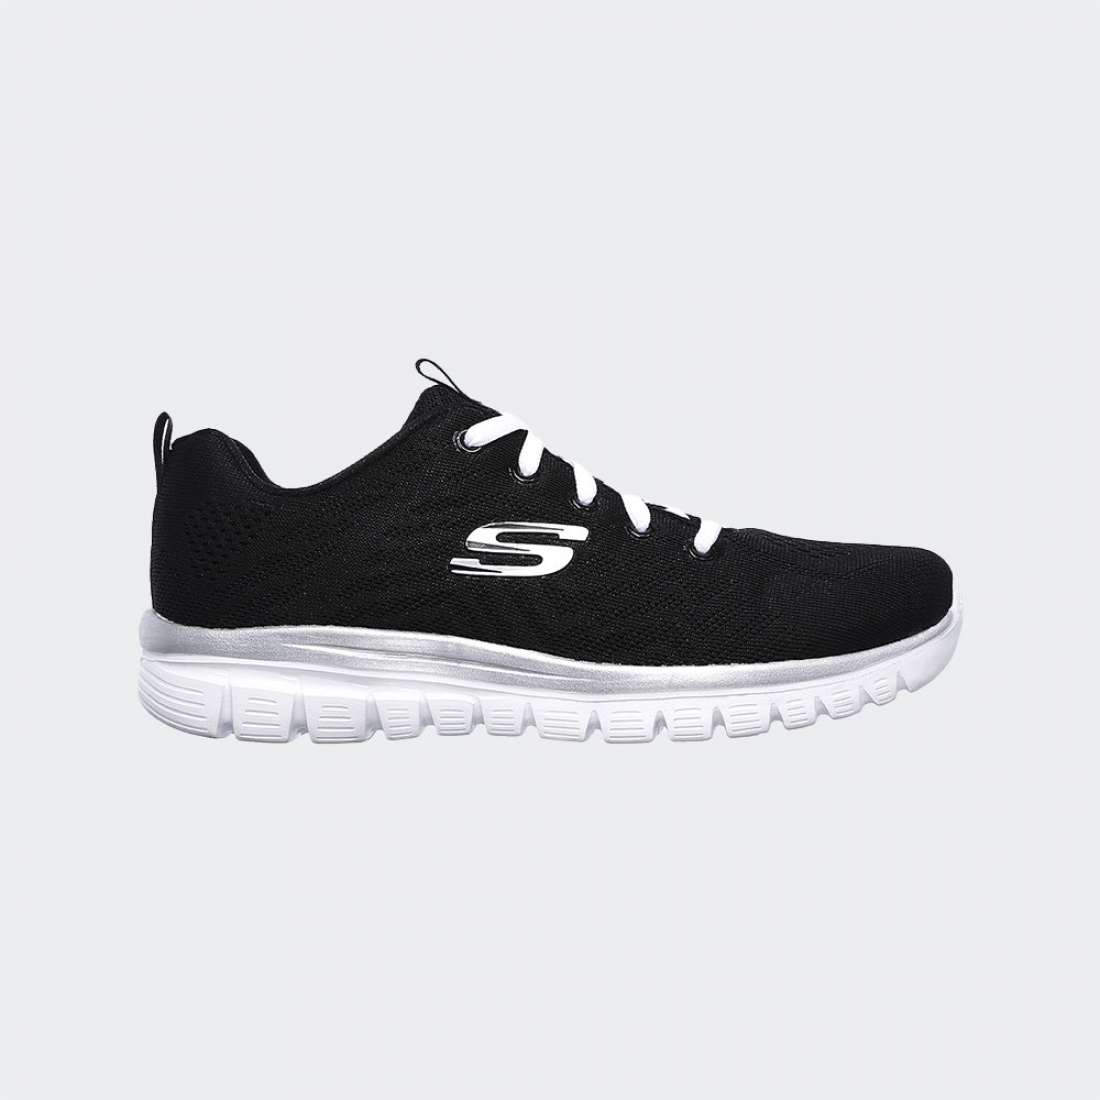 SKECHERS GET CONNECTED W BLACK/WHITE